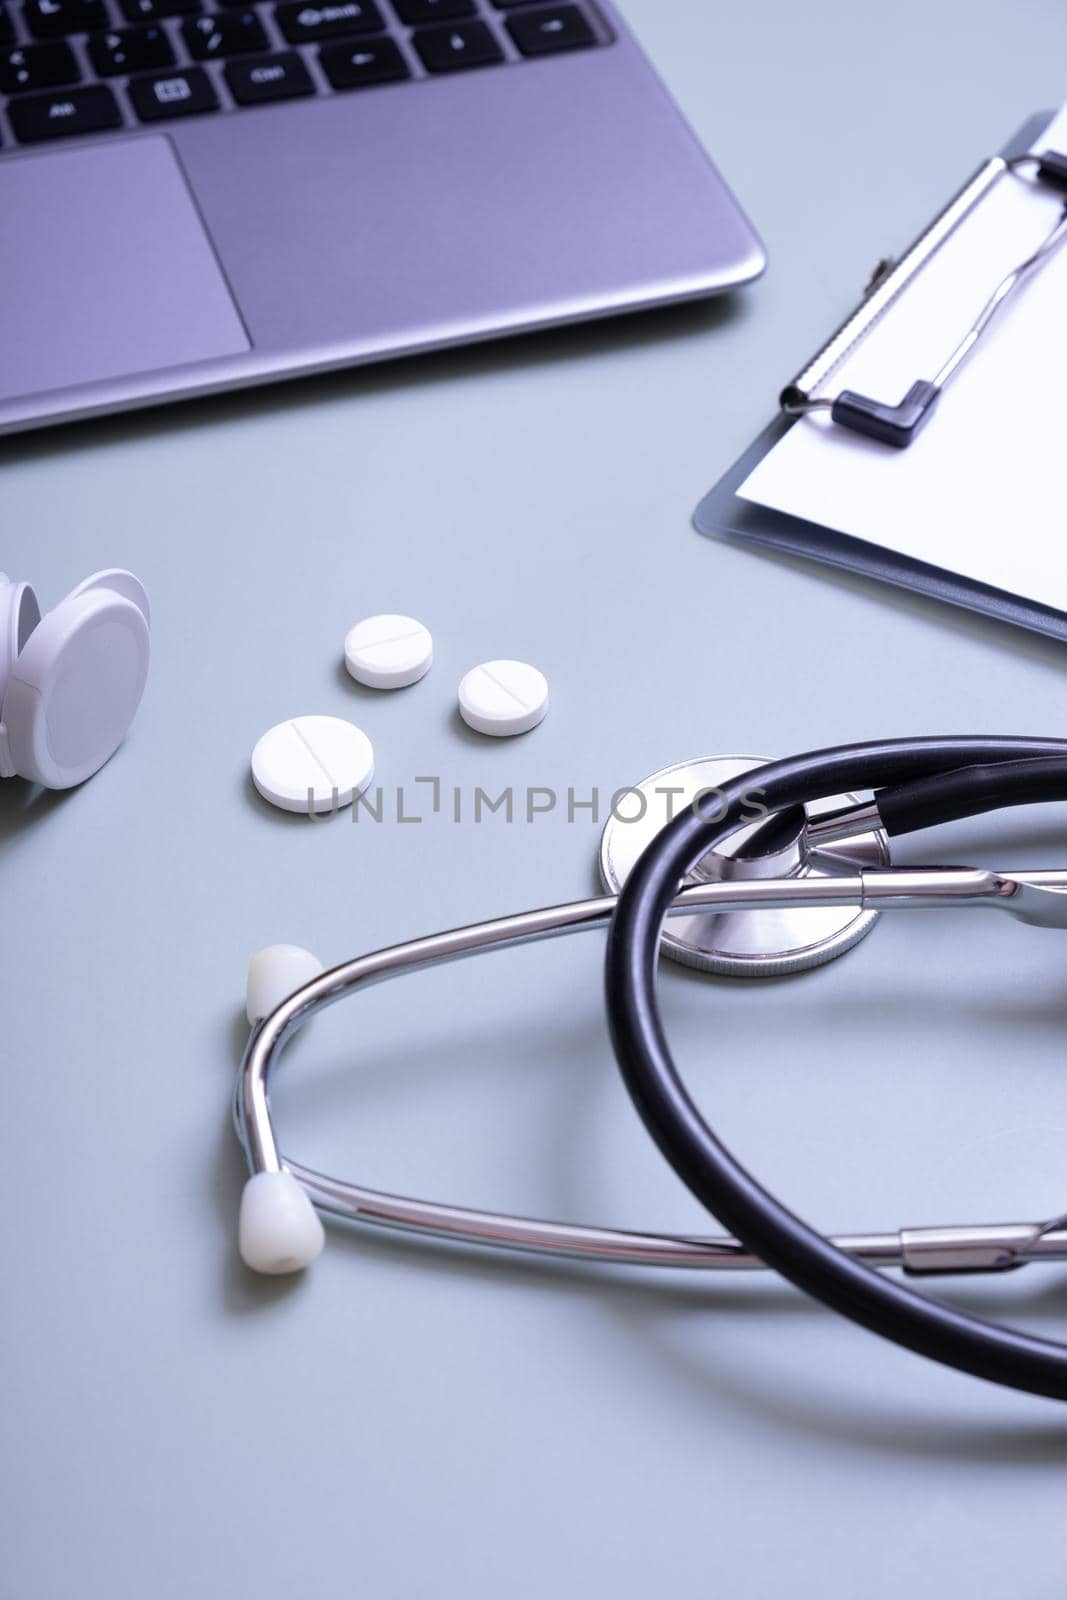 Stethoscope, pills with a container on the desktop on the background of a laptop and a tablet by ssvimaliss